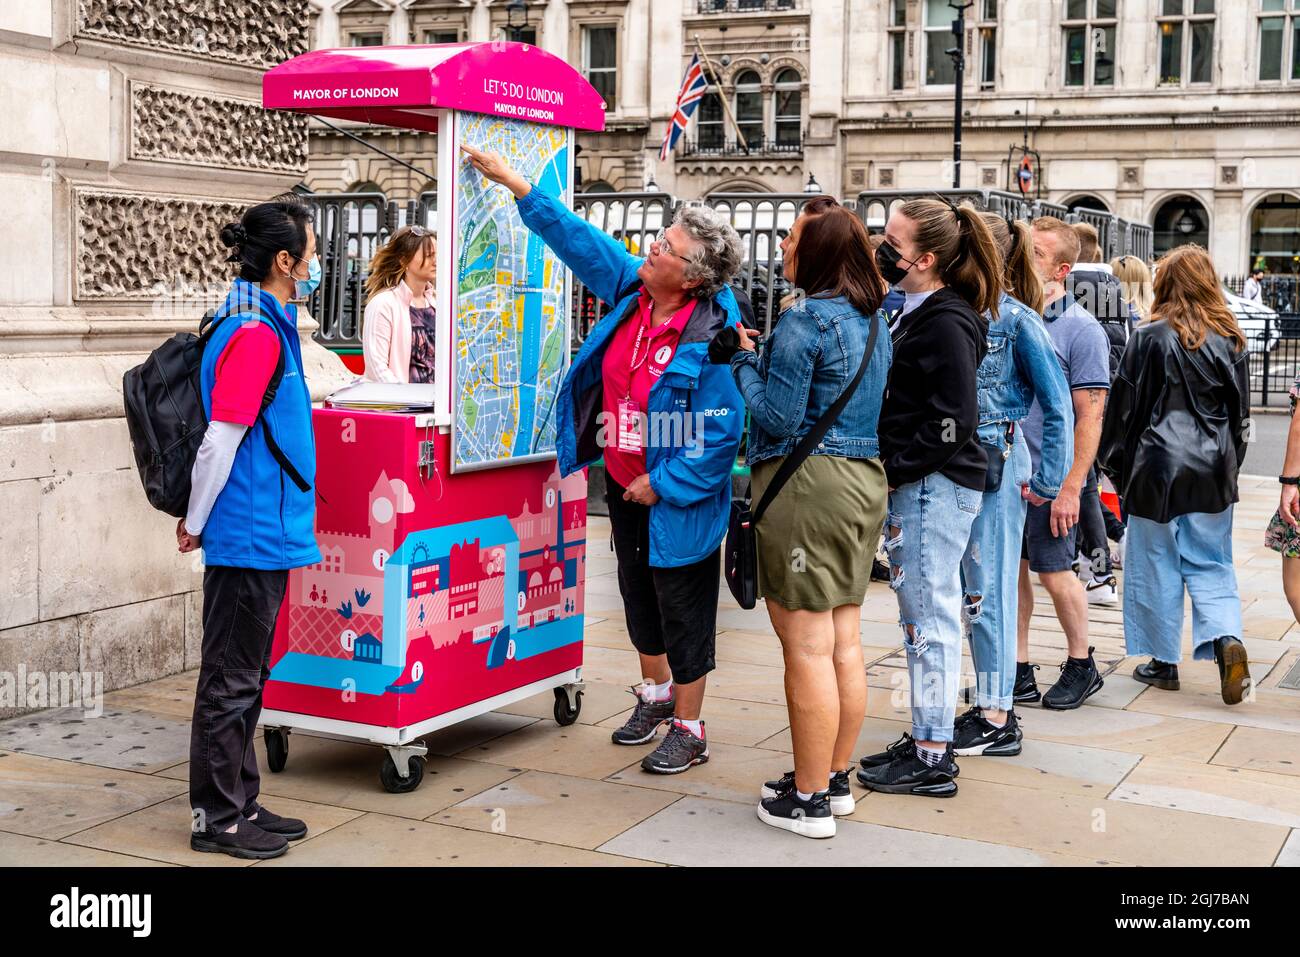 Team London Ambassadors Help Visitors To London By Giving Them Directions On A Map, Parliament Square, London, UK Stock Photo